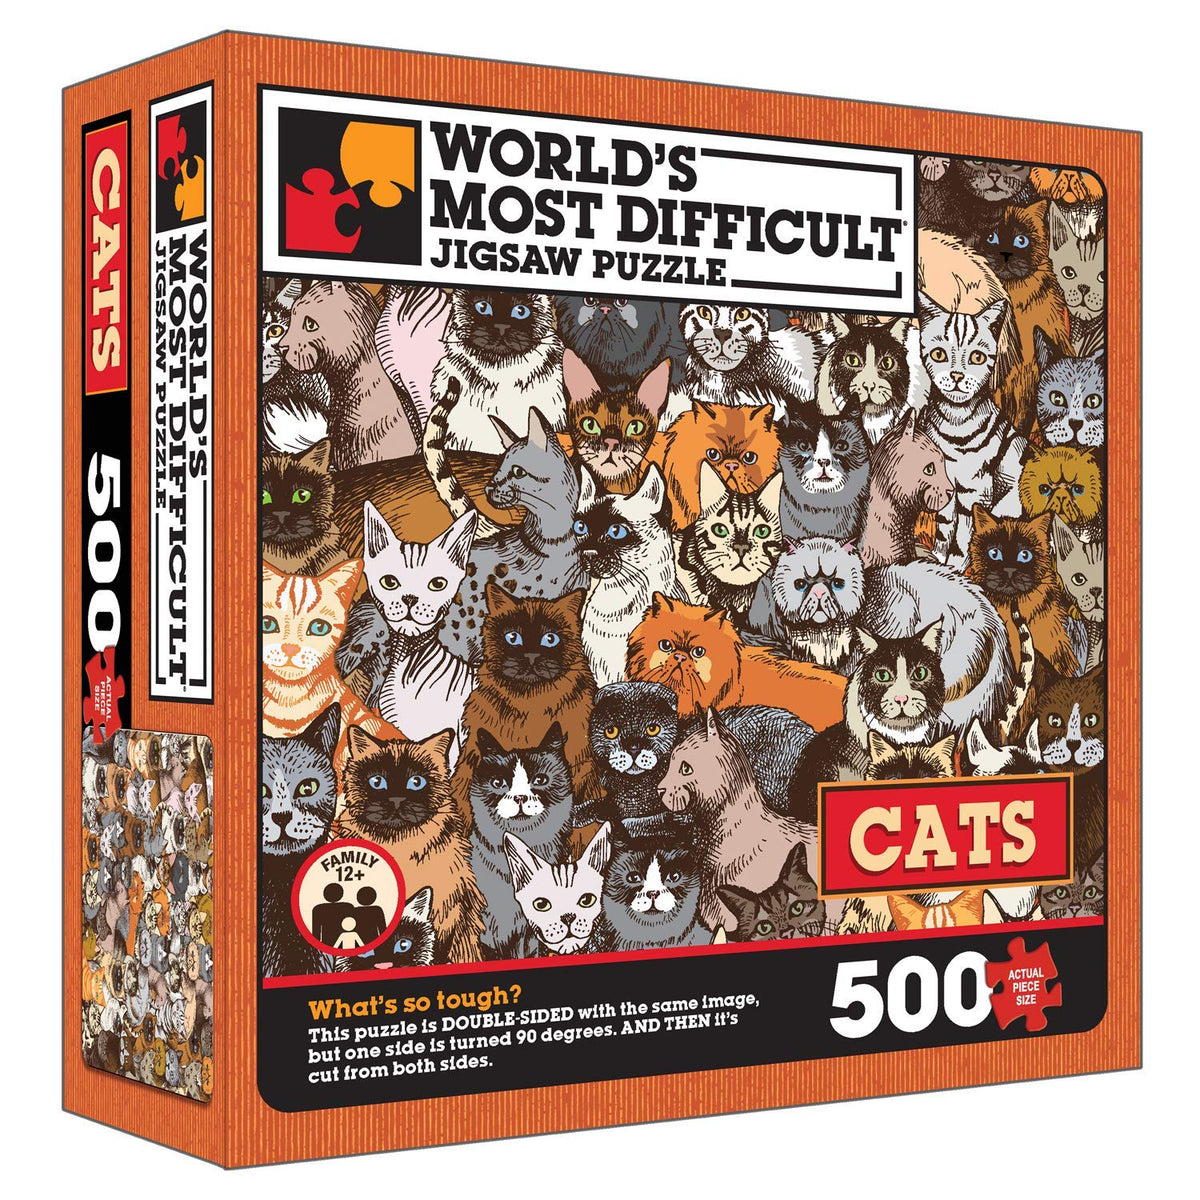 http://tdcgames.com/cdn/shop/files/5529_worlds_most_difficult_puzzle_cats_box_front_main_1200x1200.jpg?v=1691531978